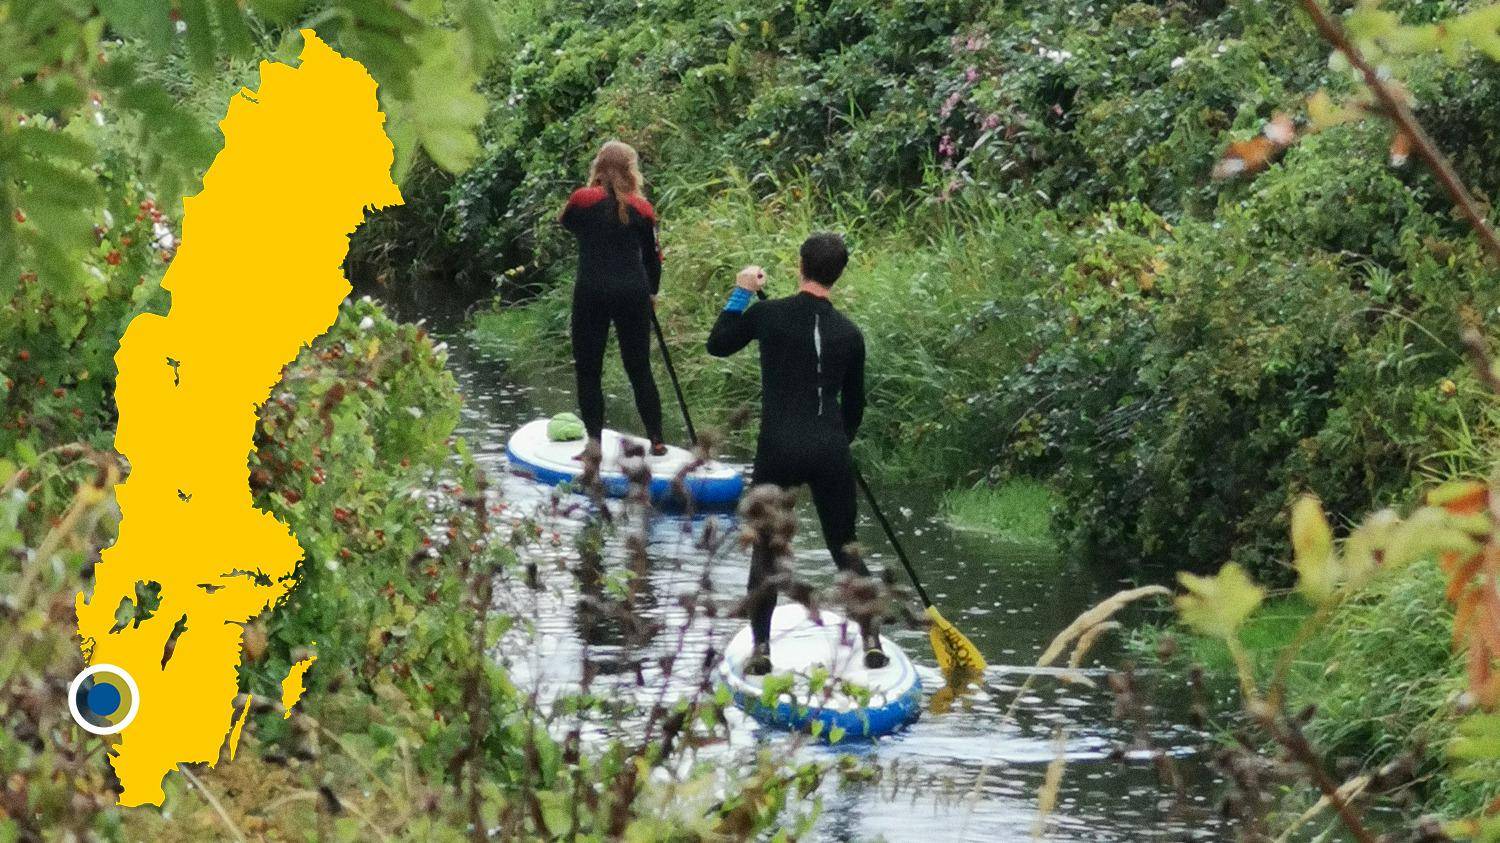 Two people paddle on stand up paddleboards in a river. There is a yellow map of Sweden with a mark that locates Himleån.